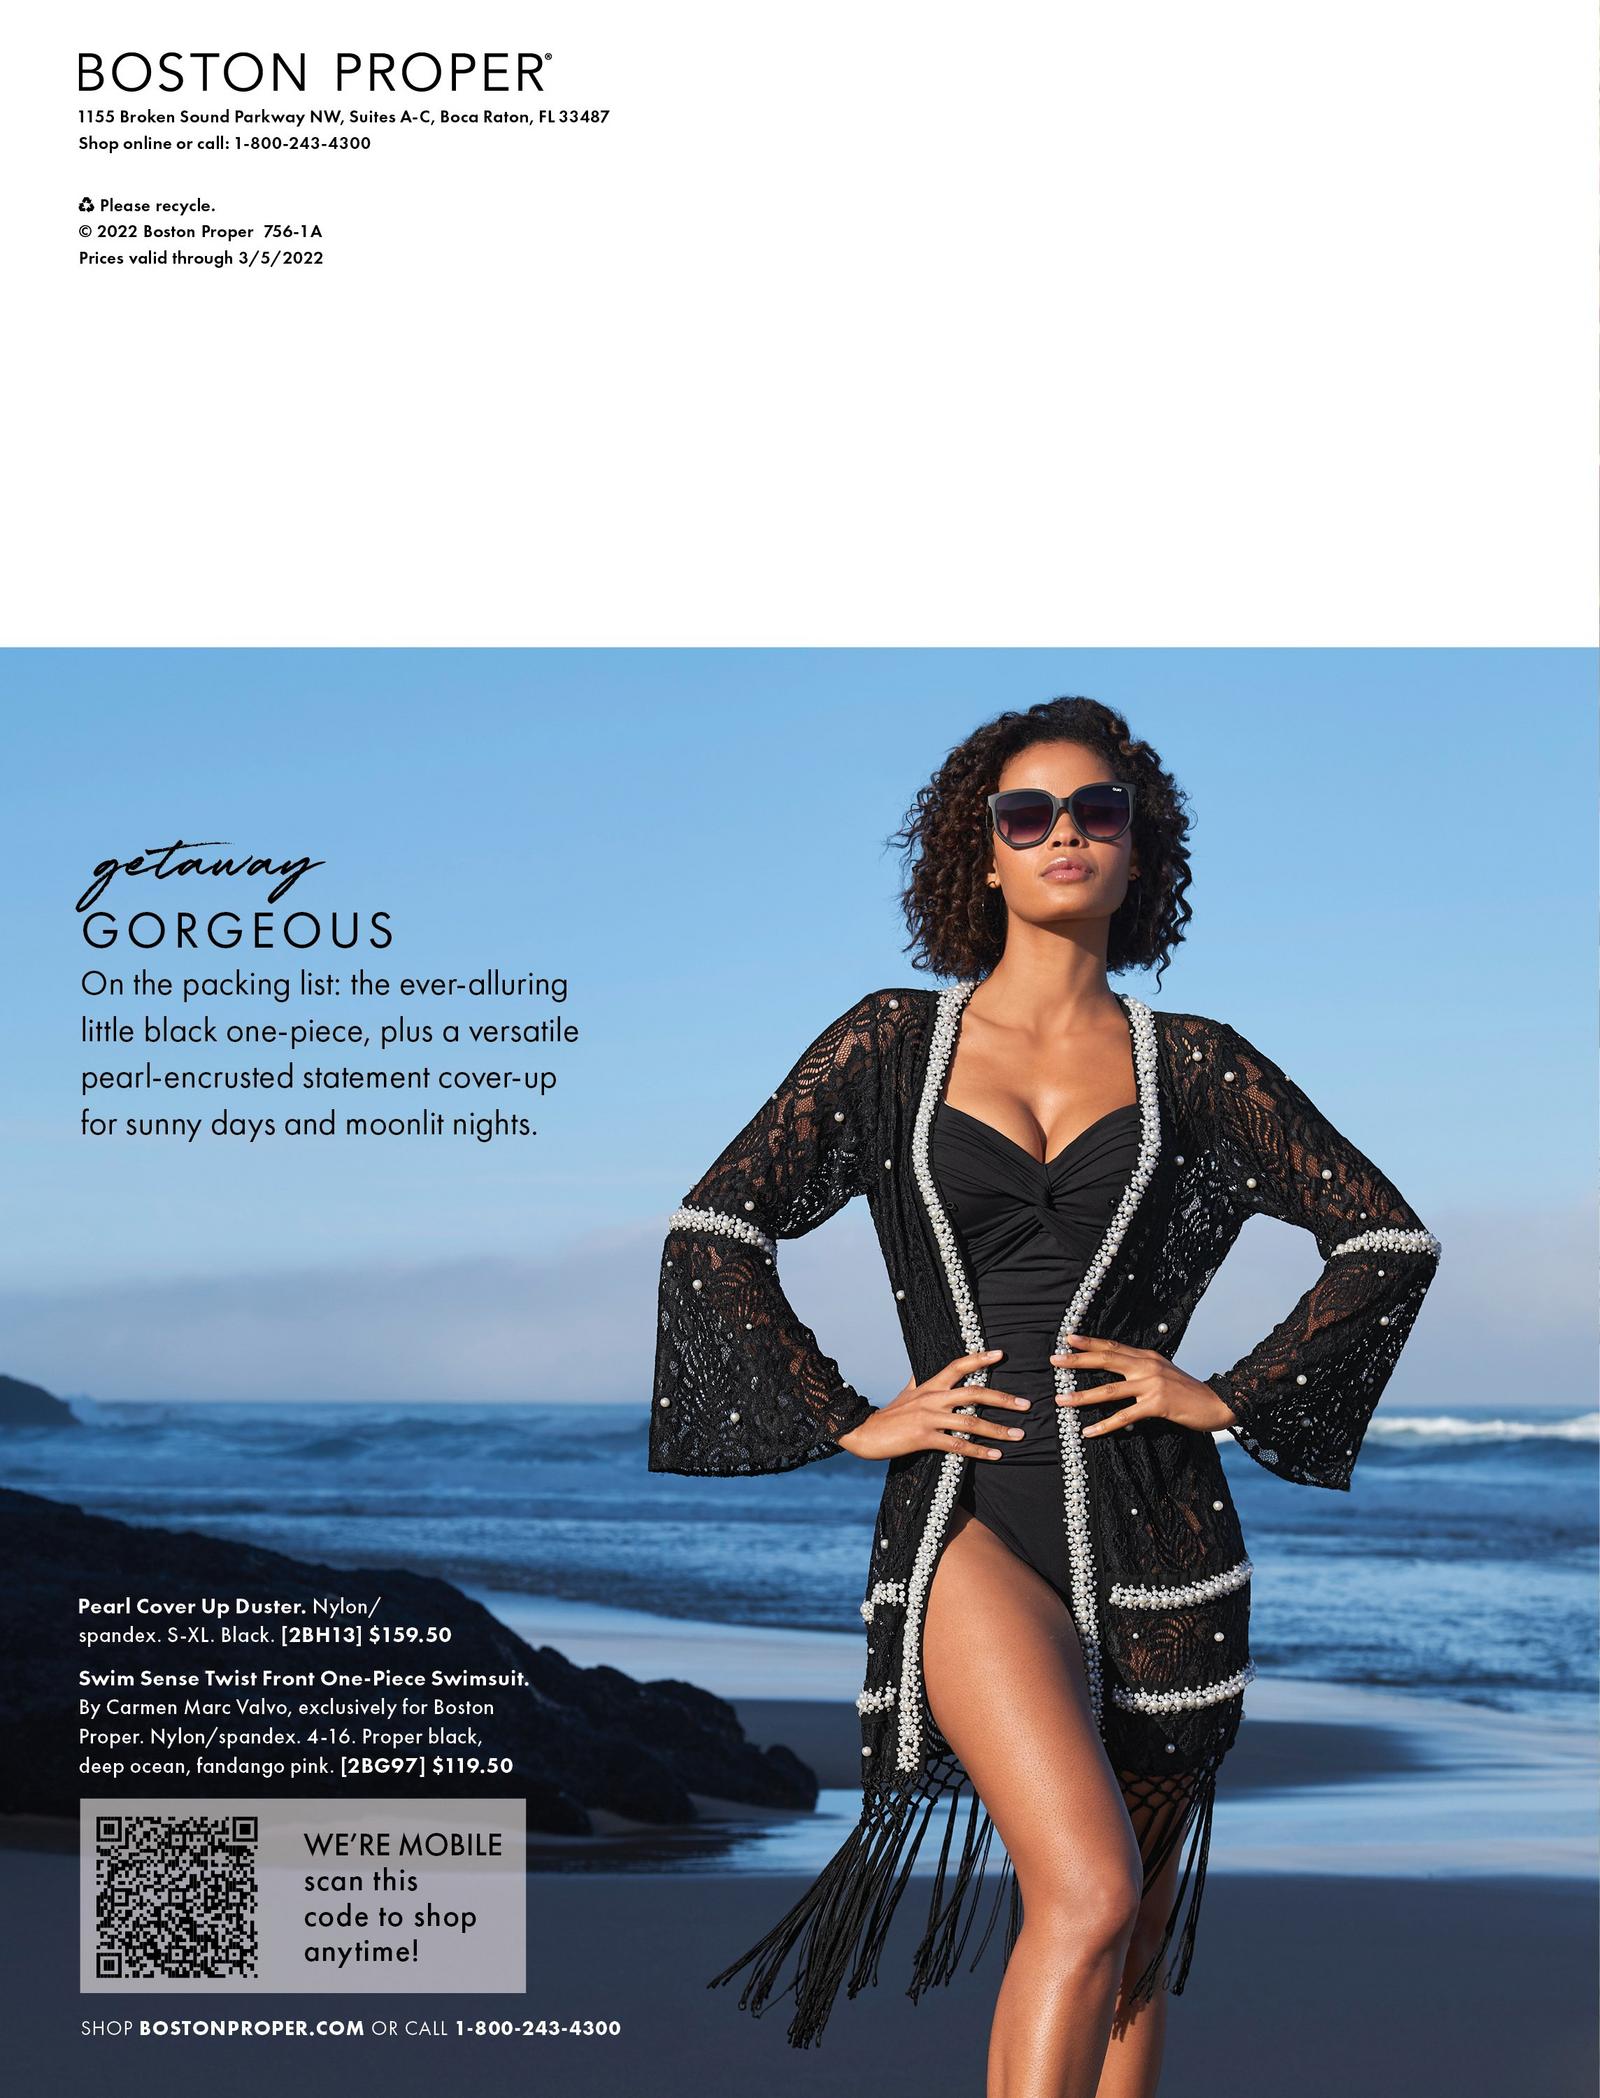 model wearing a black pearl embellished duster, black one piece swimsuit, and sunglasses.